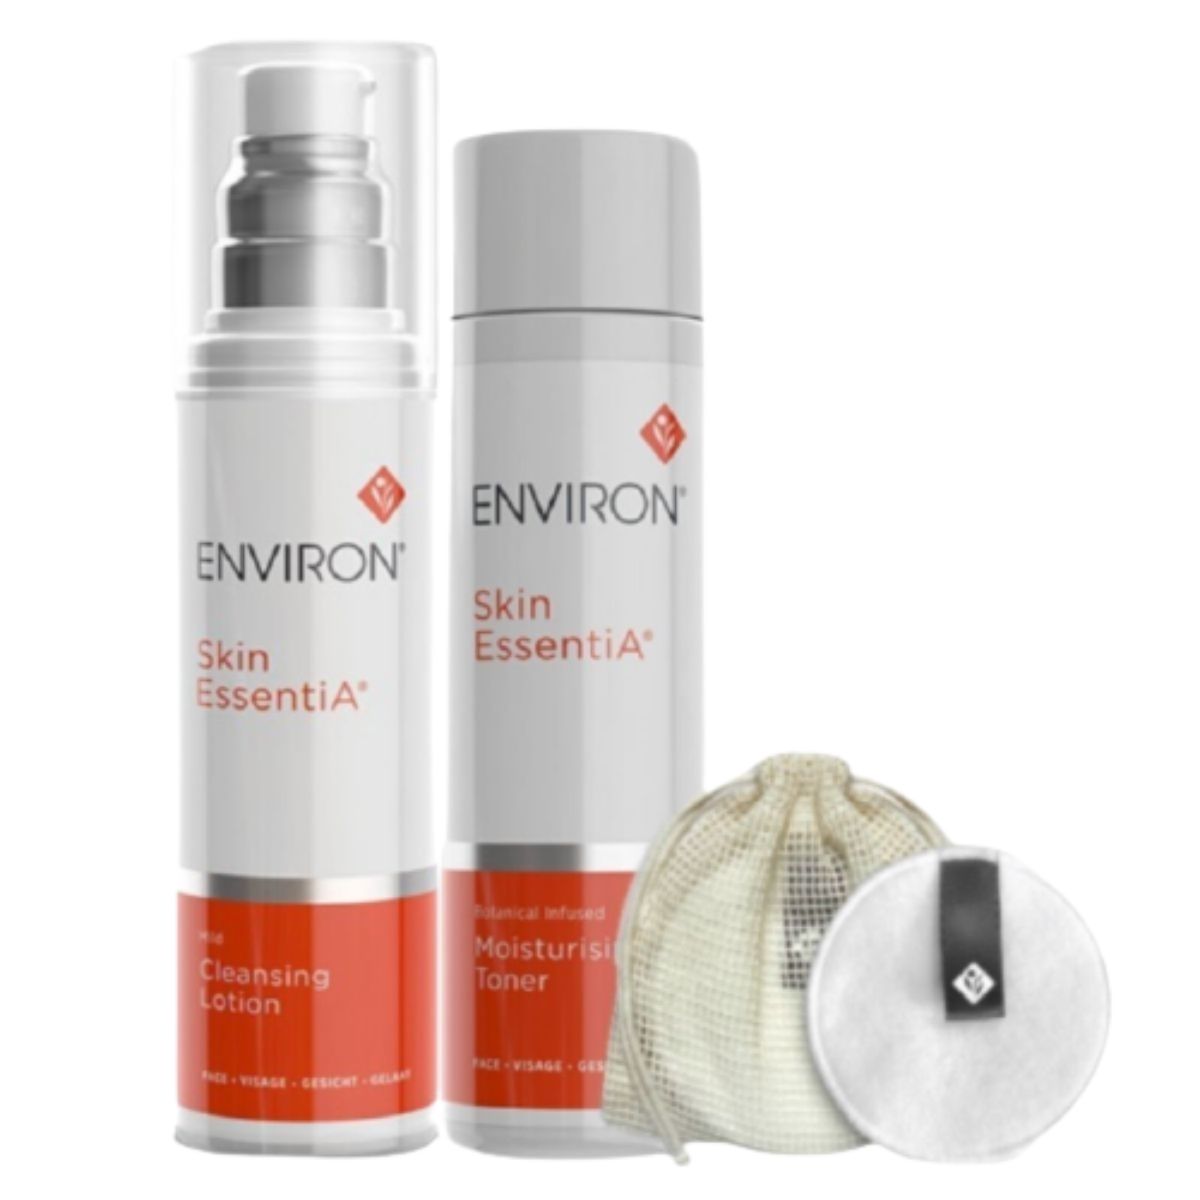 Environ Cleansing Lotion and Moisturising Toner Solution Bundle